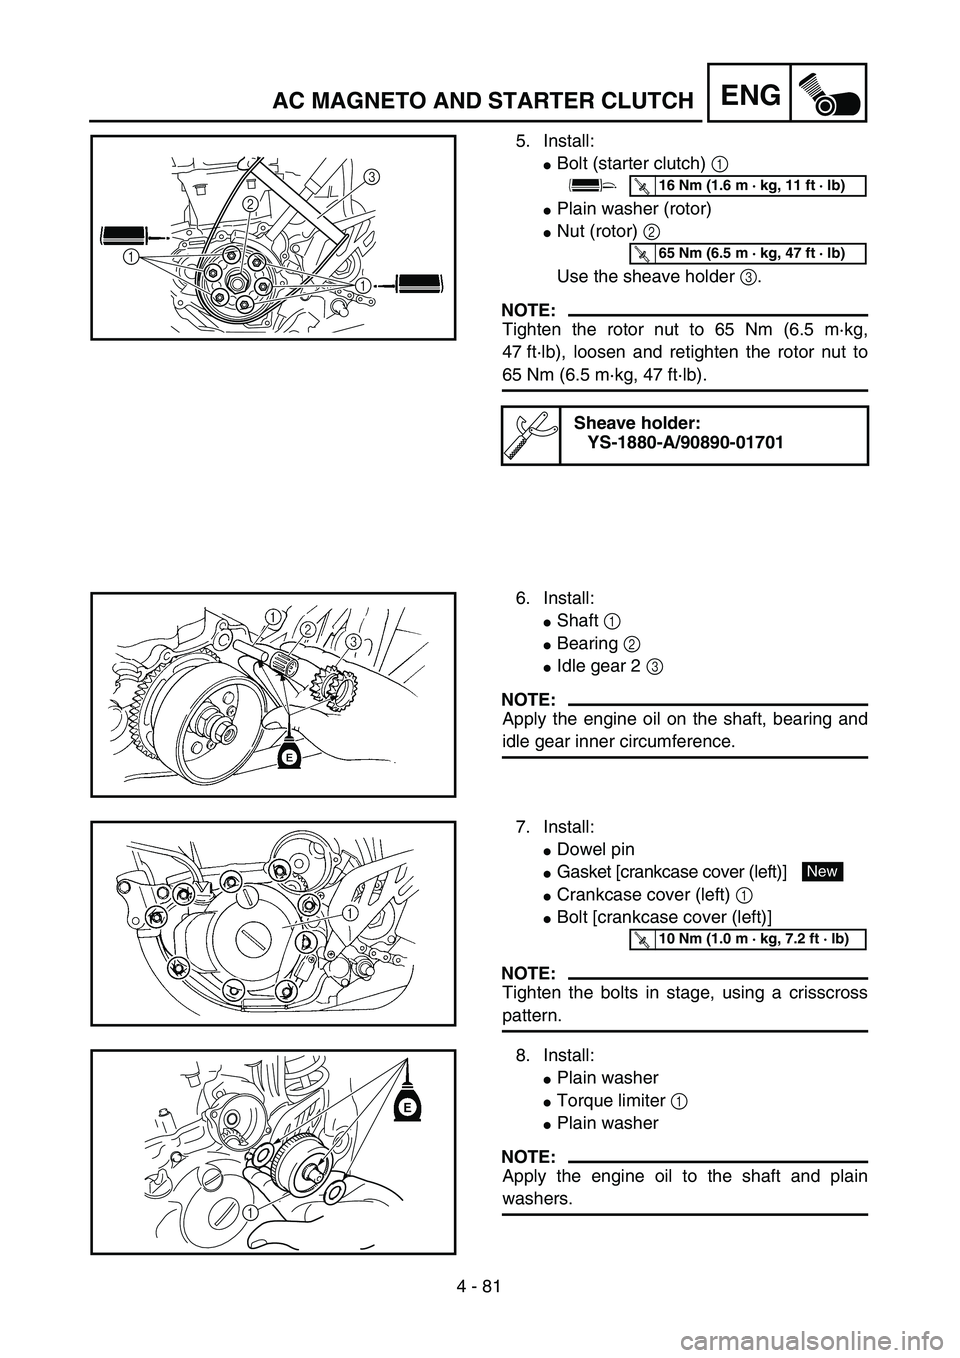 YAMAHA WR 450F 2004  Manuale de Empleo (in Spanish) 4 - 81
ENG
5. Install:
Bolt (starter clutch) 1 
Plain washer (rotor)
Nut (rotor) 2 
Use the sheave holder 3.
NOTE:
Tighten the rotor nut to 65 Nm (6.5 m·kg,
47 ft·lb), loosen and retighten the ro